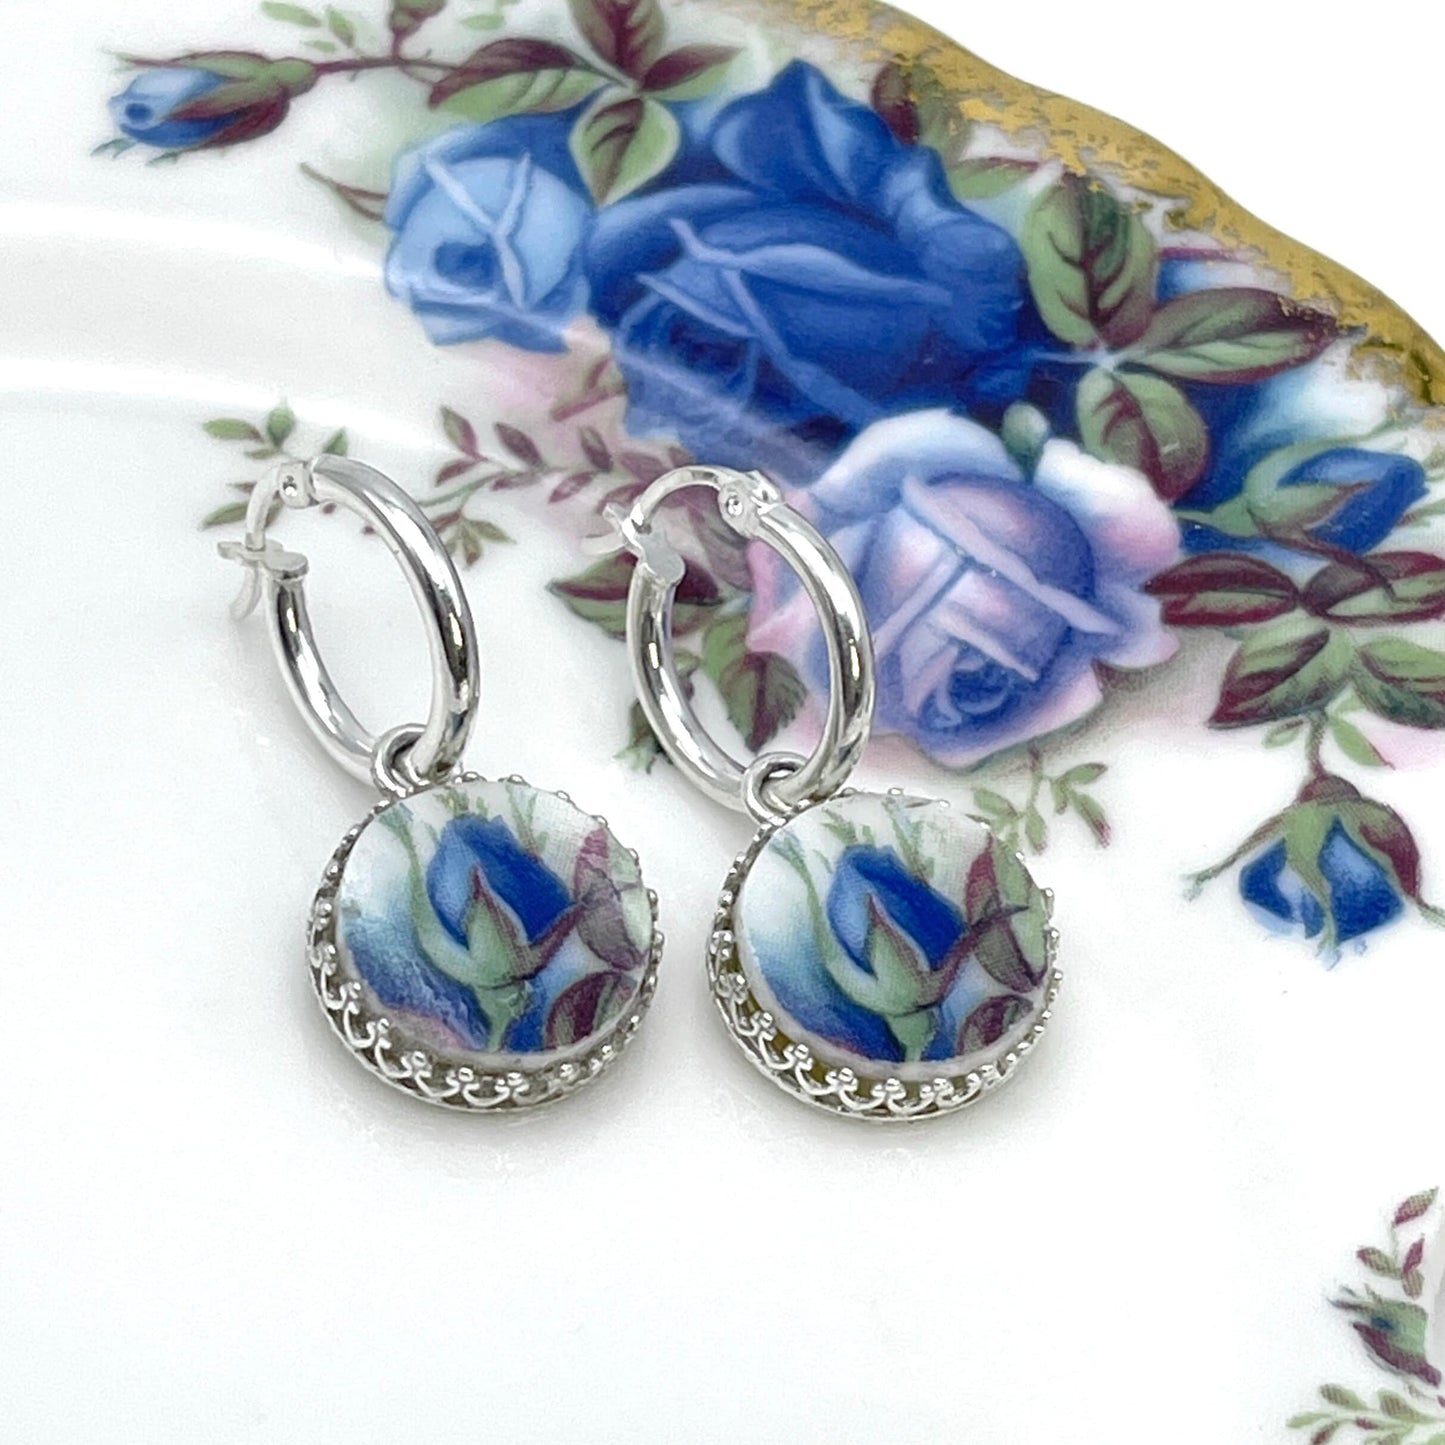 Royal Albert Moonlight Rose Hoop Earrings, Unique Gift for Wife, Broken China Jewelry, Sterling Silver Gifts for Women, Graduation Gifts